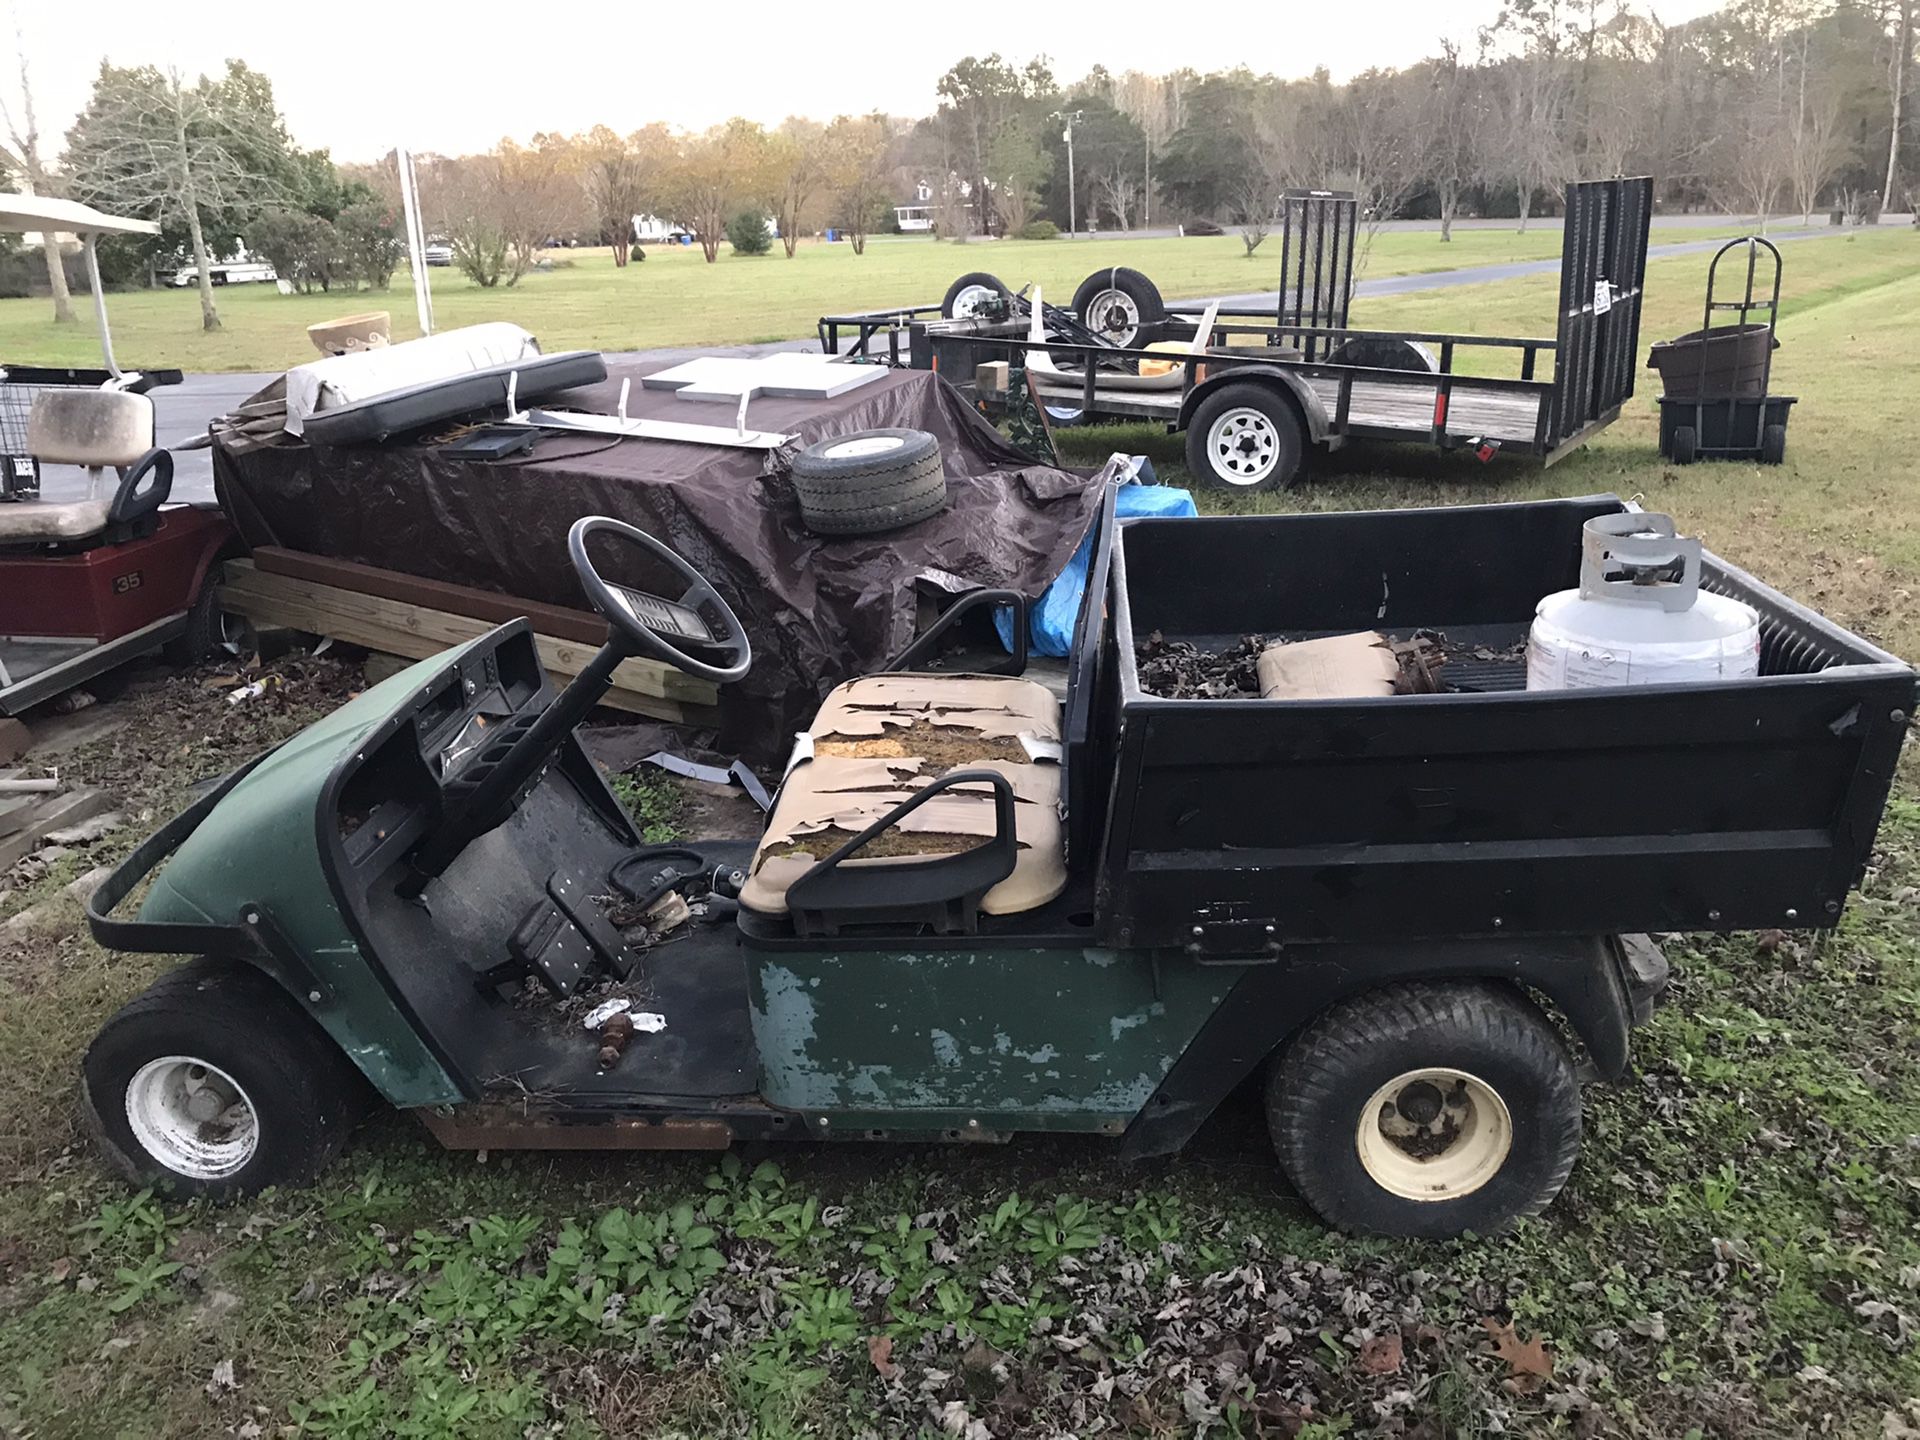 Two gas workhorse golf carts